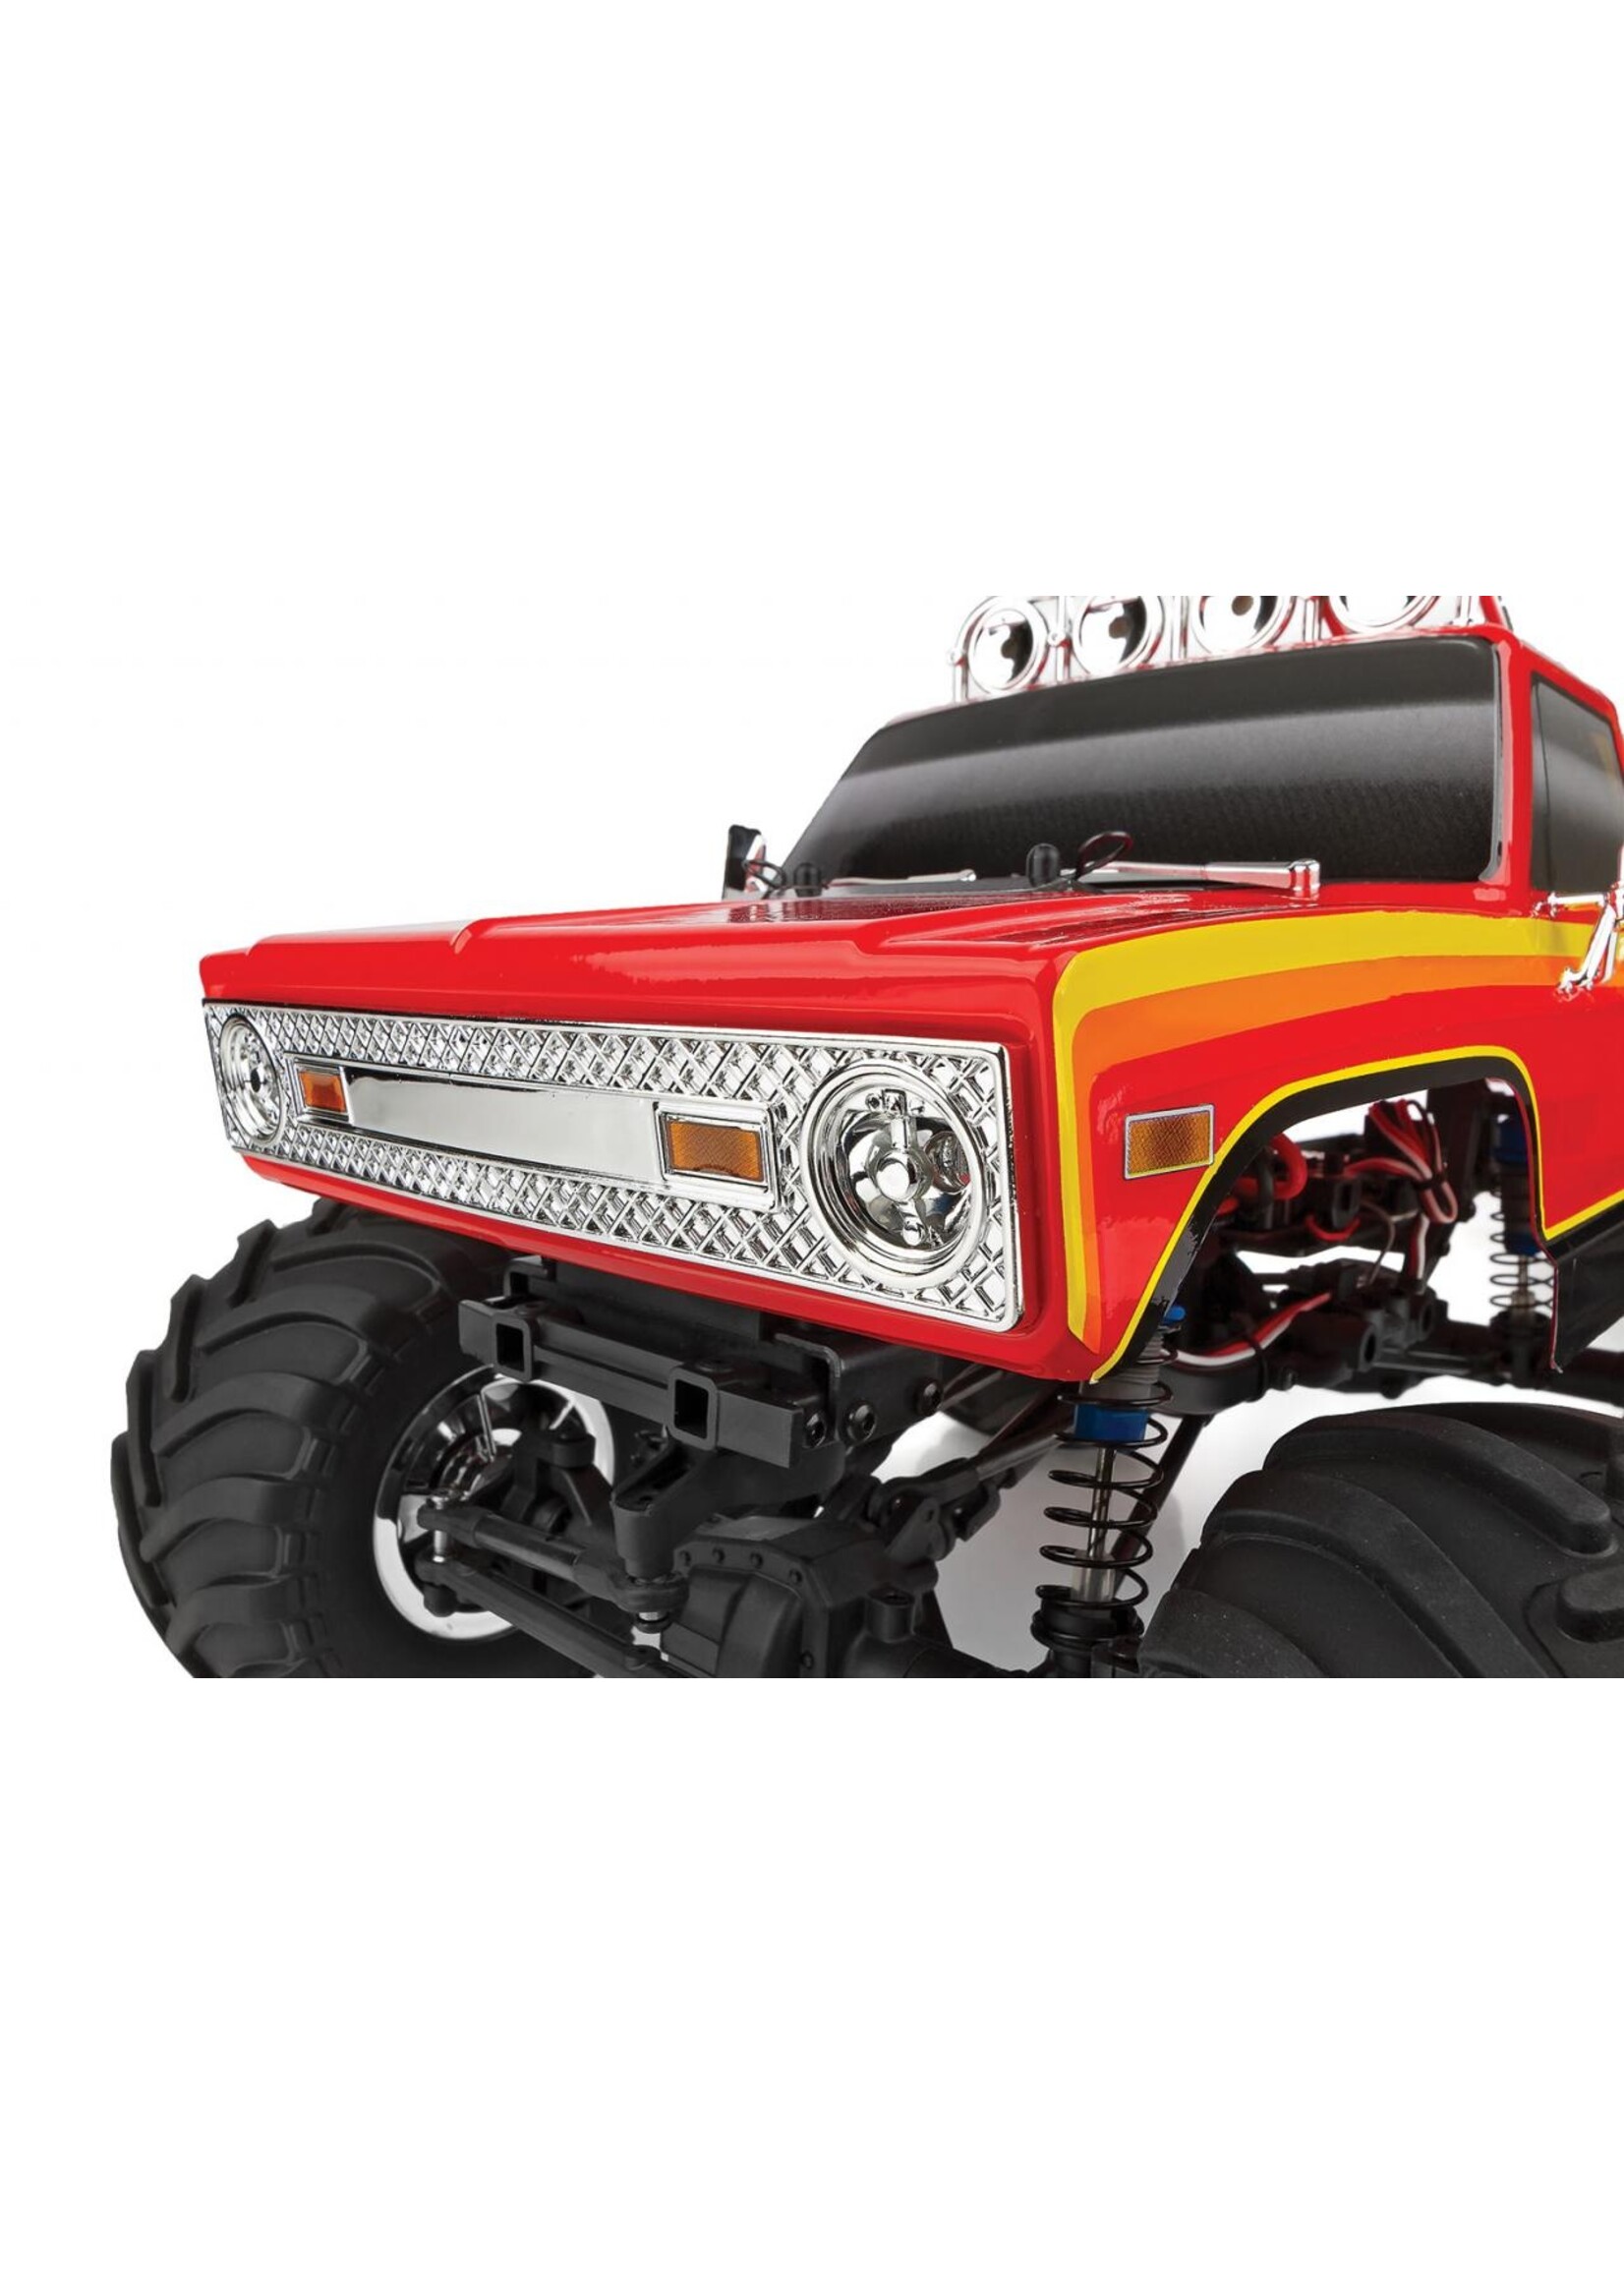 Associated ASC40007C - 1/12 4WD MT12 Monster Truck, RTR - Red